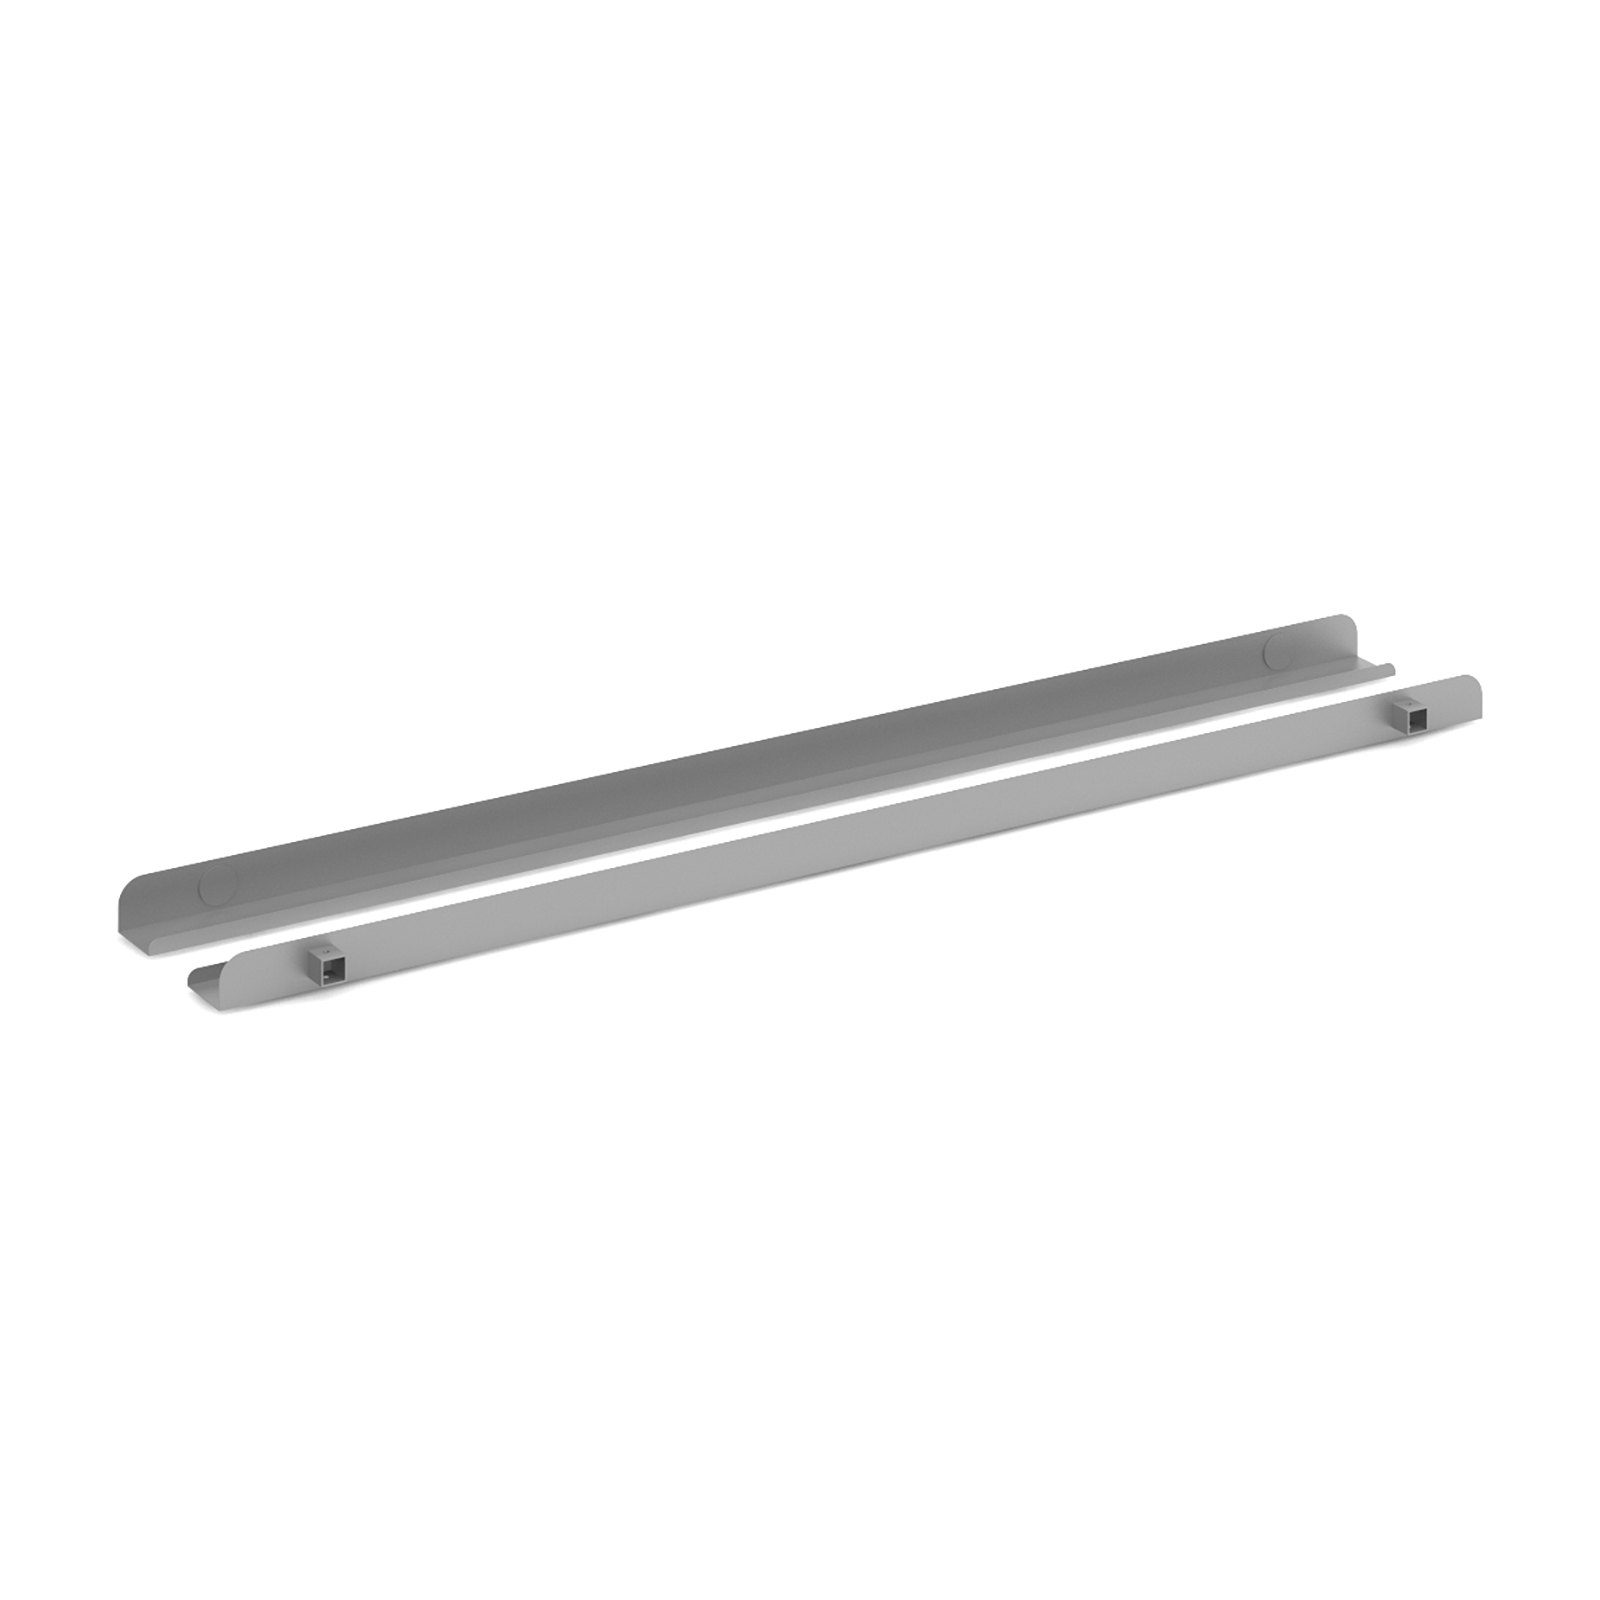 Connex single cable tray 1200mm - silver